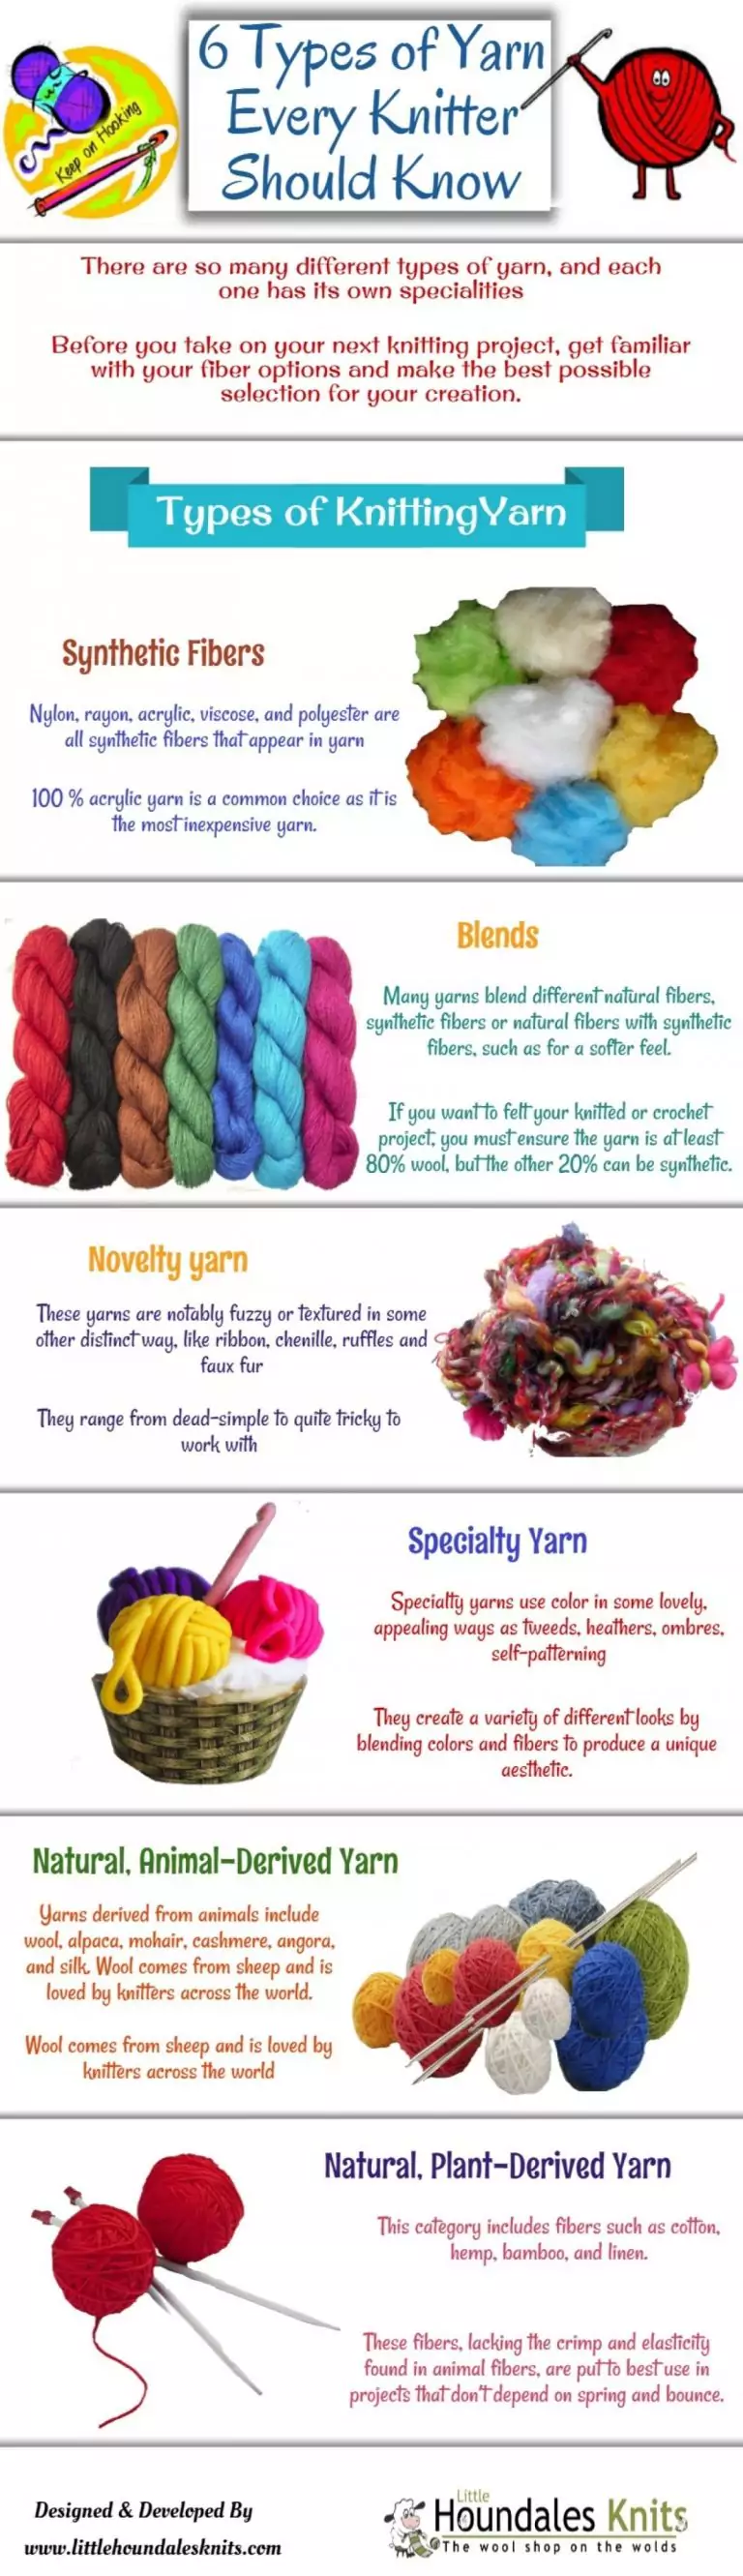 6 Types Of Yarn Every Knitter Should Know - 19 Knitting Infographics 🧶 ...